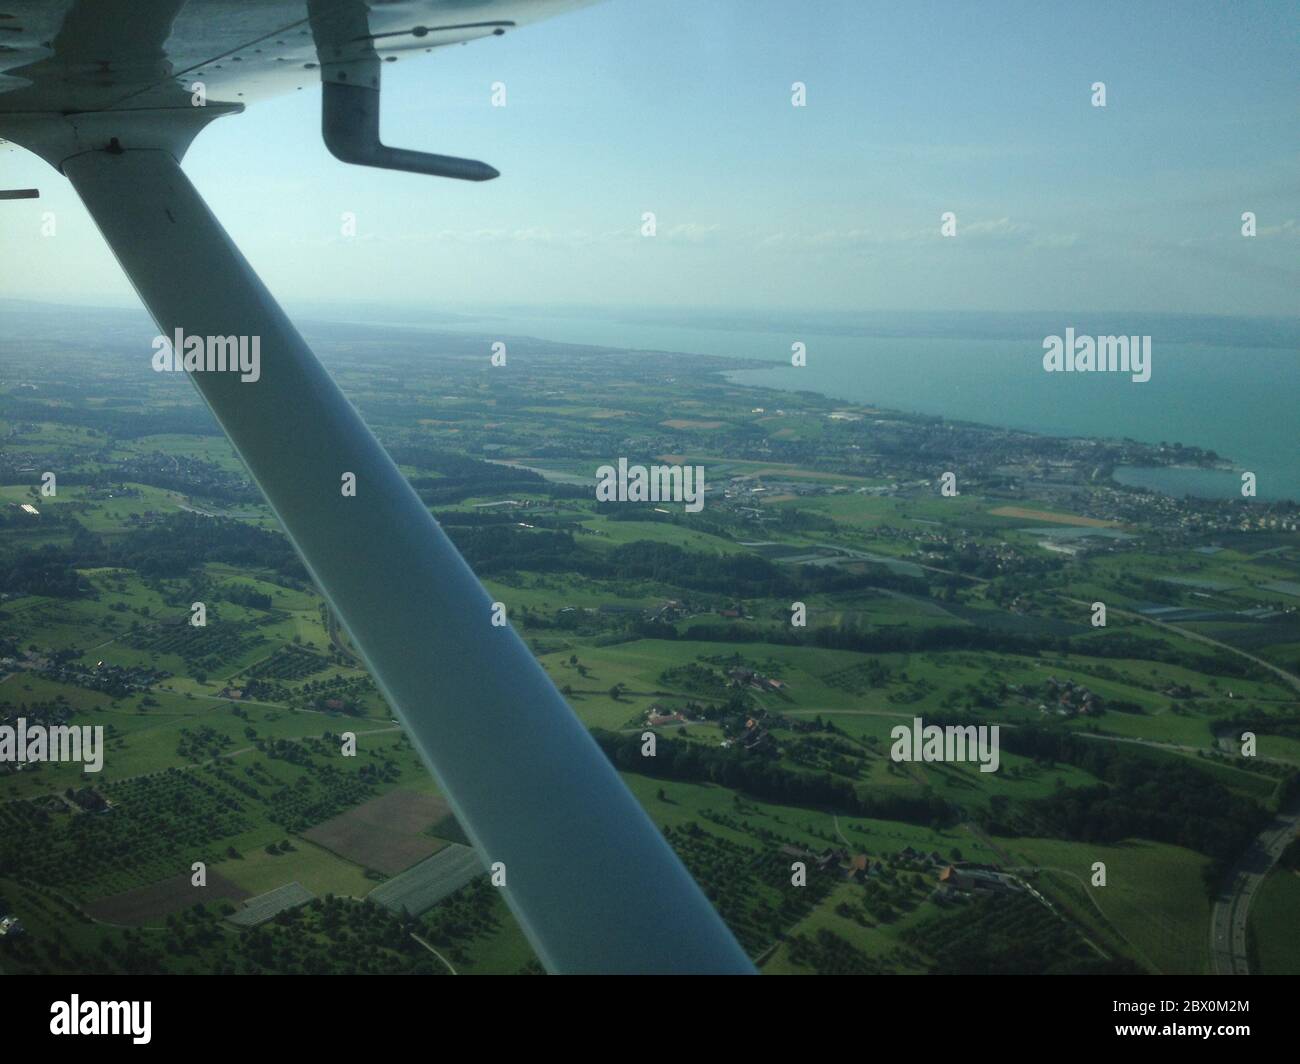 Lake of constance round trip in a small propellerplane 11.7.2015 Stock Photo